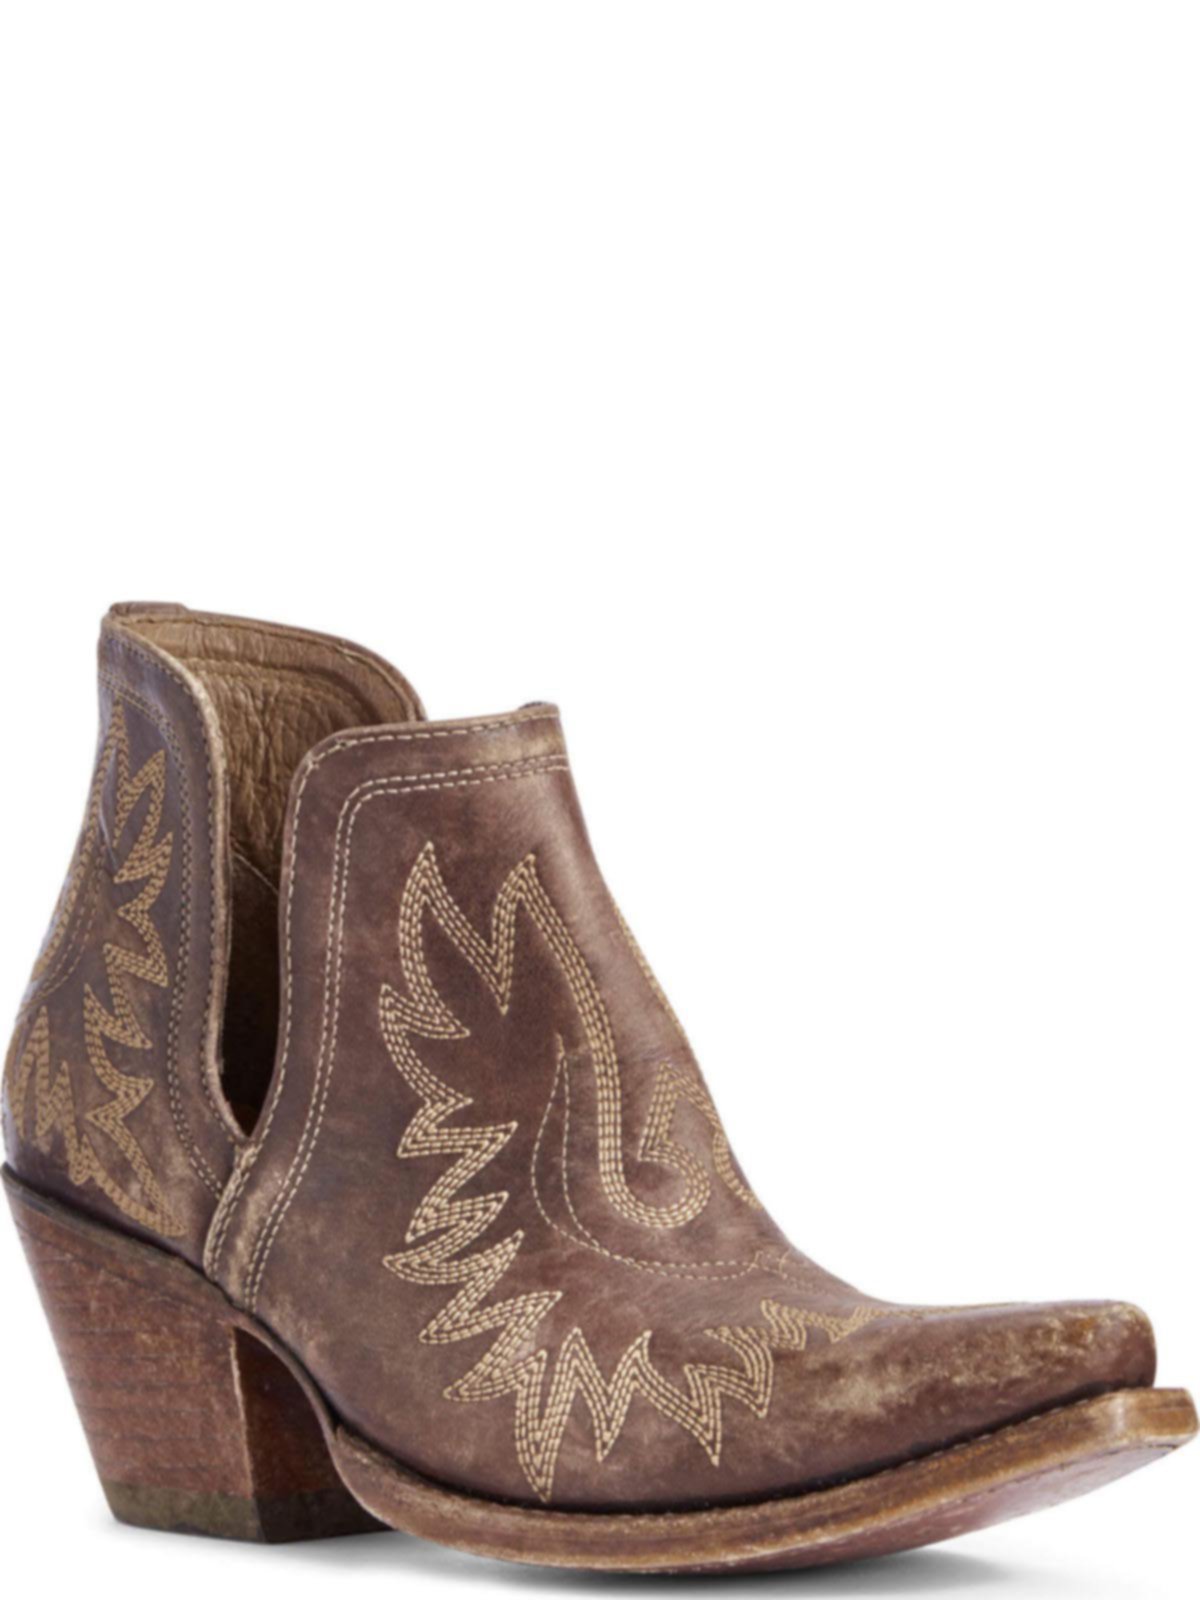 Shop Ariat Womens Dixon Western Ankle Boot 10031487 | Save 20% + Free ...